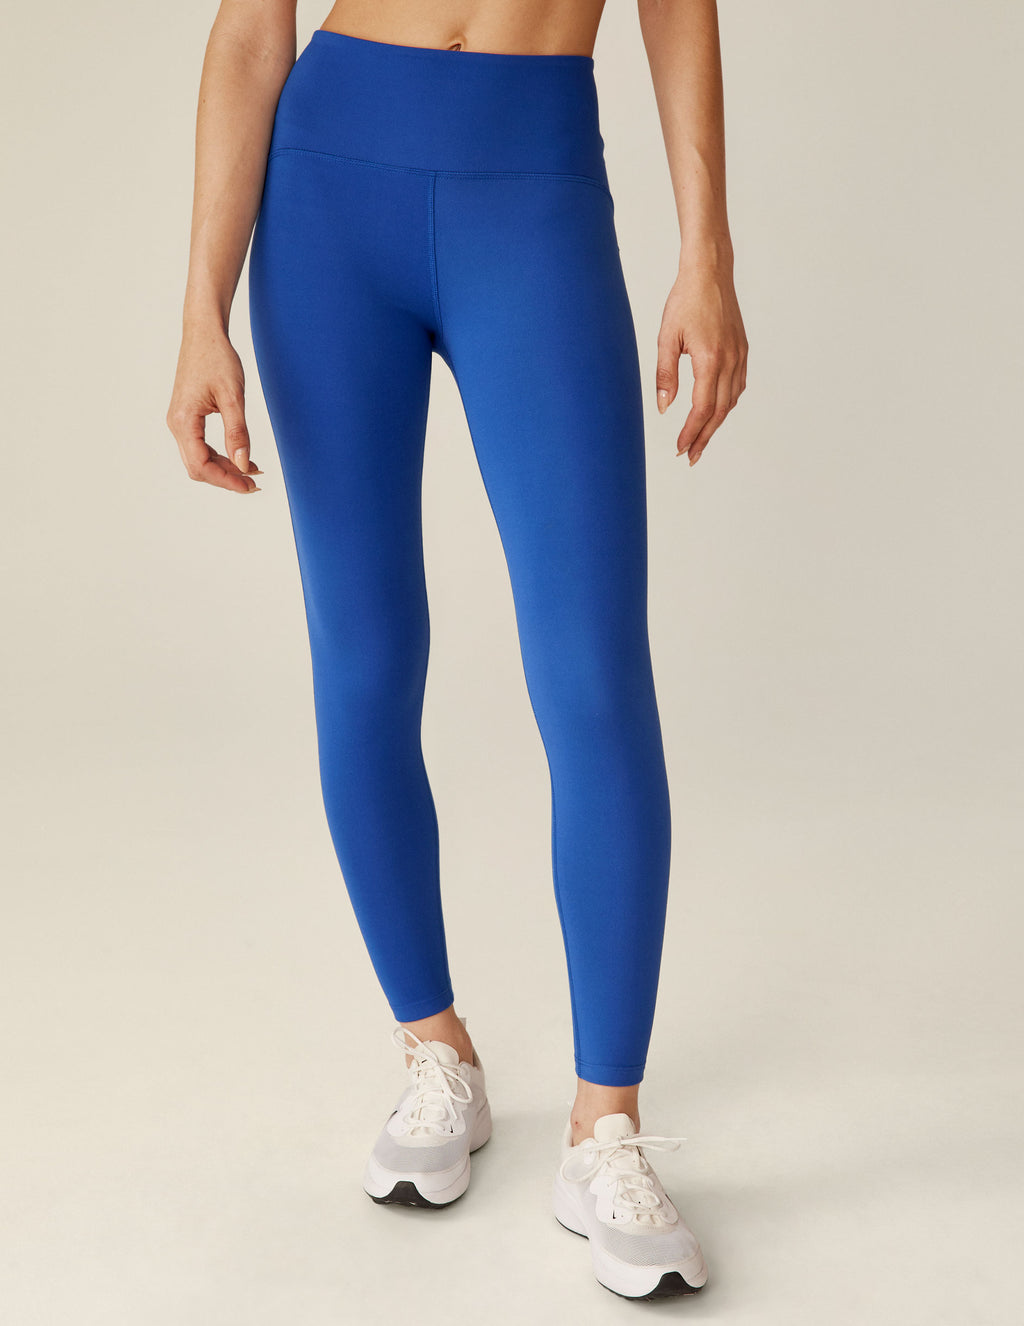 Frenchtrendz - Buy Cotton Spandex Ankle Leggings from Frenchtrendz. Go  visit our site. http://frenchtrendz.com/frenchtrendz-cotton-spandex -white-ankle-legging #clothing #clothingbrand #frenchtrendz  #frenchtrendzlovers #trending #capri #spandex ...